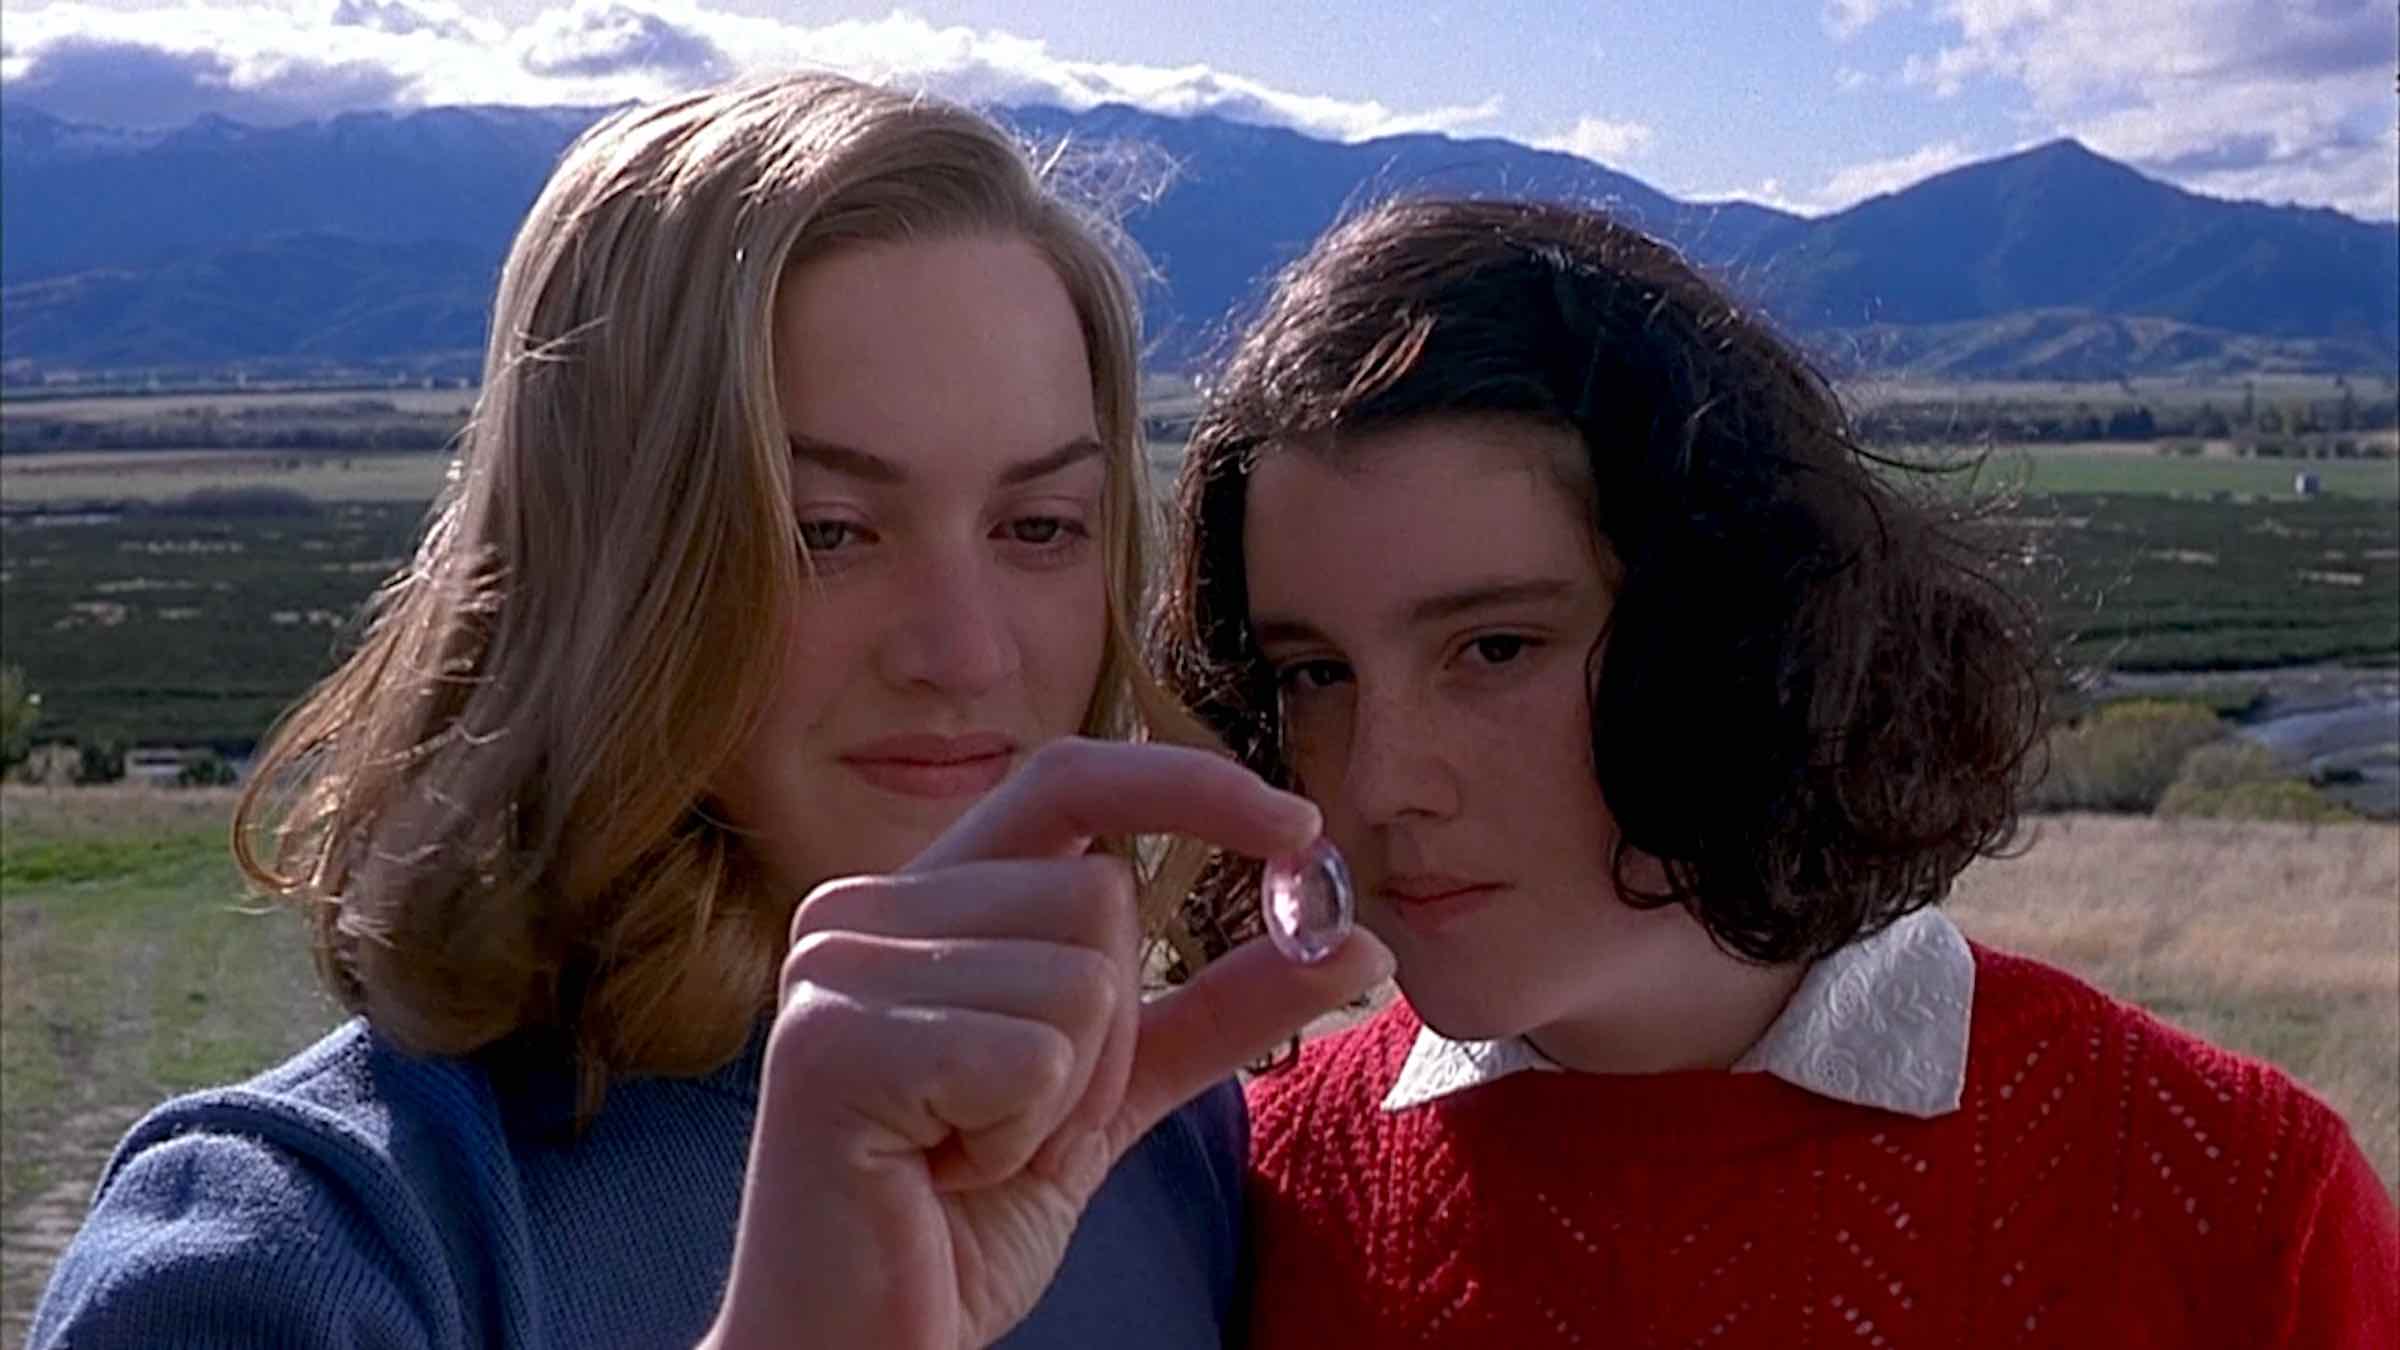 IMG:https://filmdaily.co/wp-content/uploads/2020/03/Heavenly-Creatures-lede.jpg